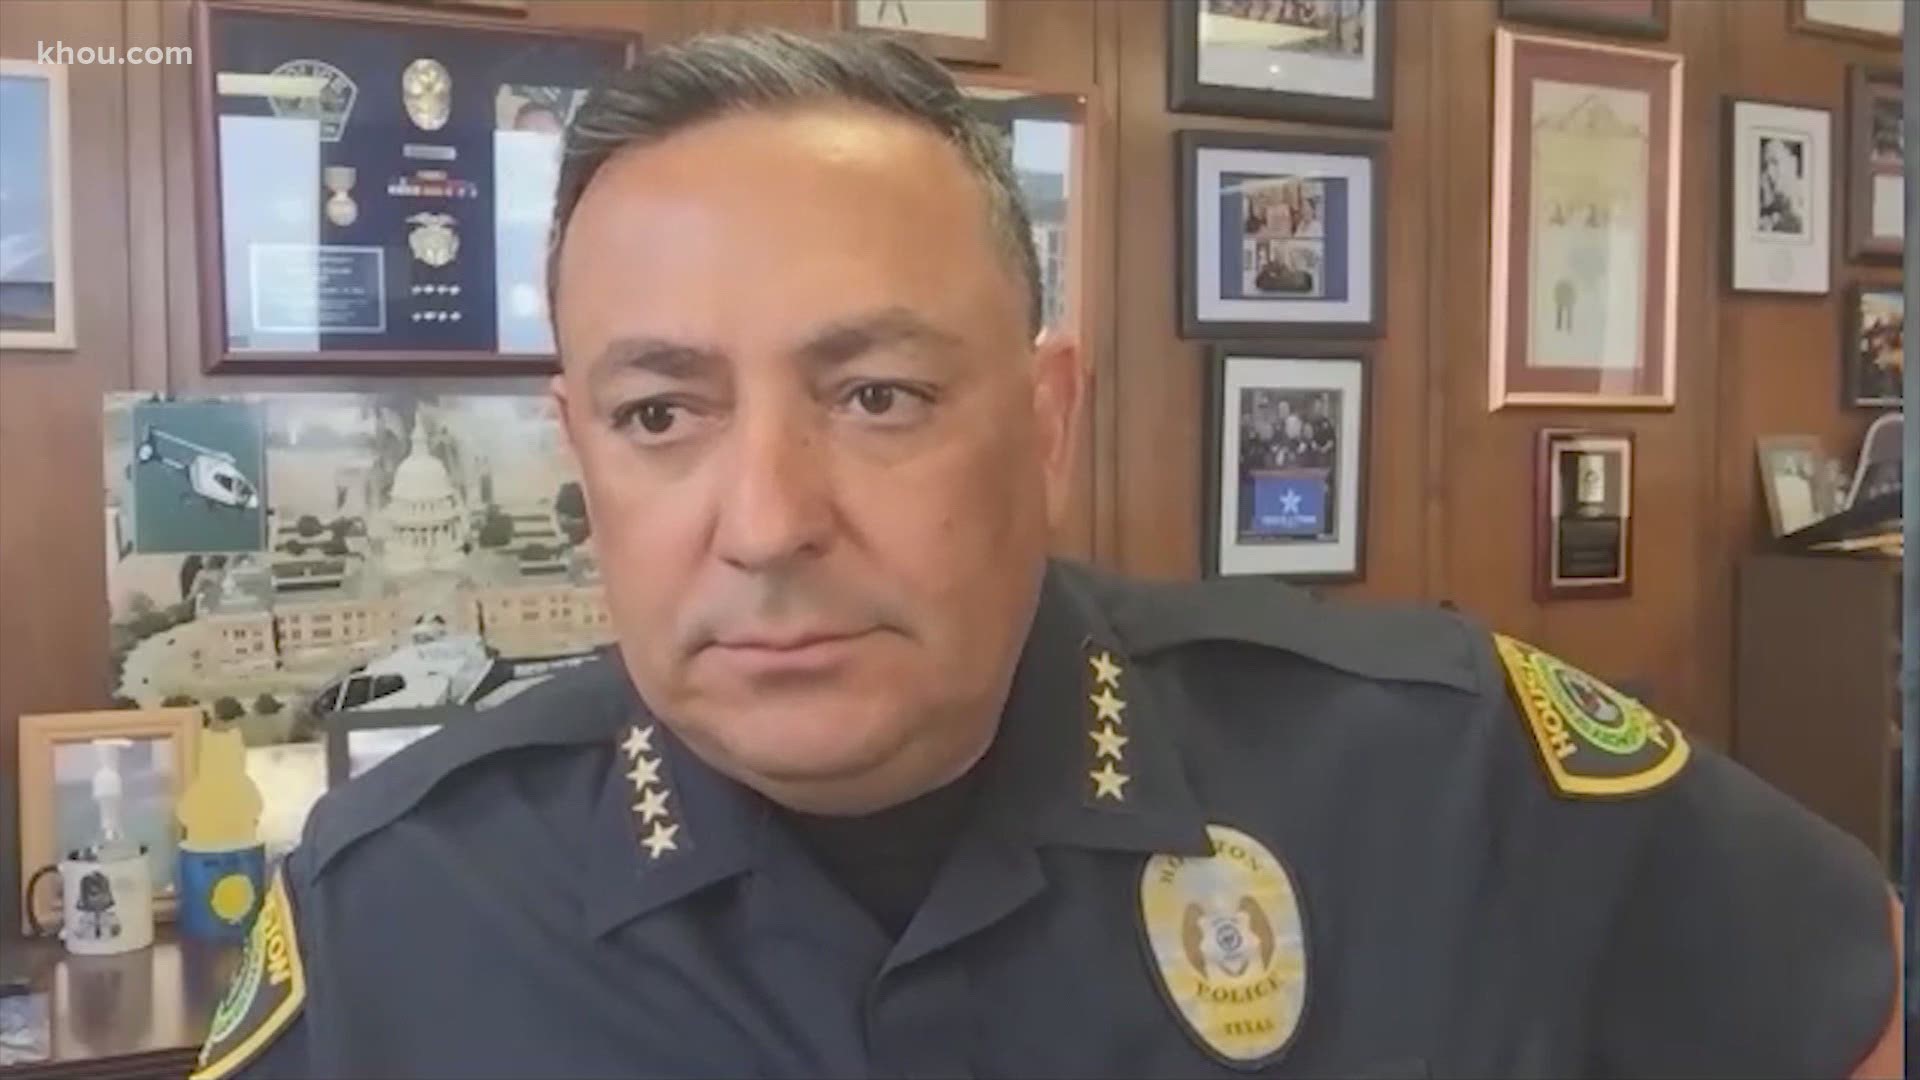 Houston Police Chief Art Acevedo spoke out about the death of George Floyd in Minneapolis police custody.